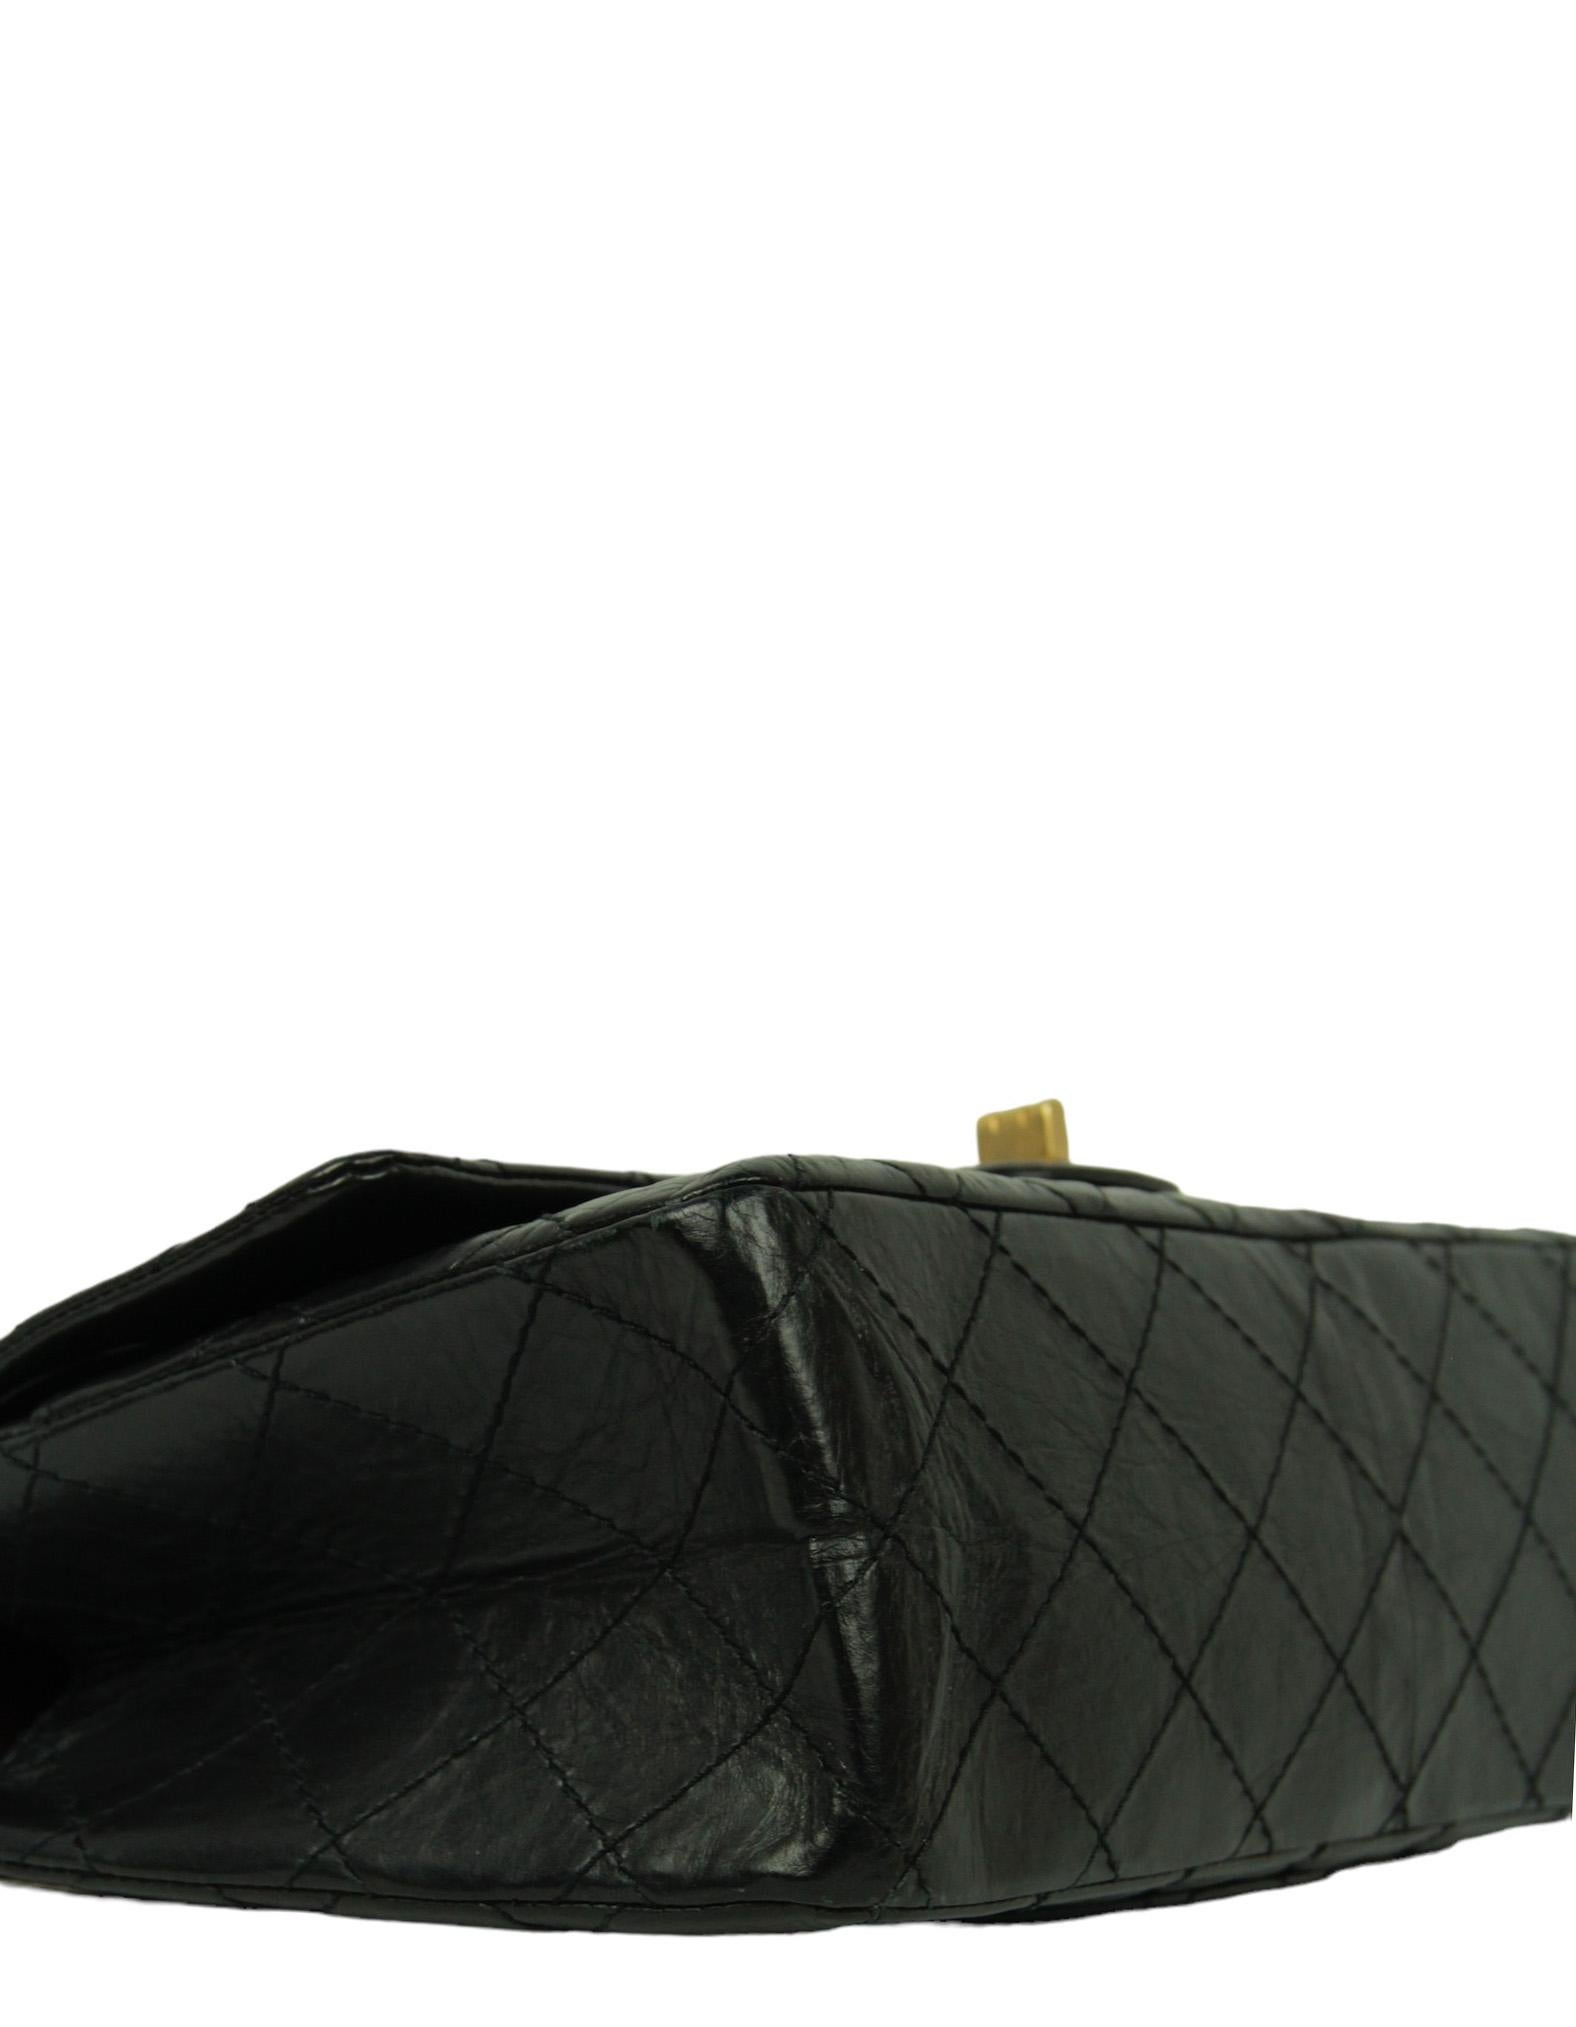 Chanel Black Calfskin Leather Quilted 2.55 Reissue 226 Flap Bag For Sale 2